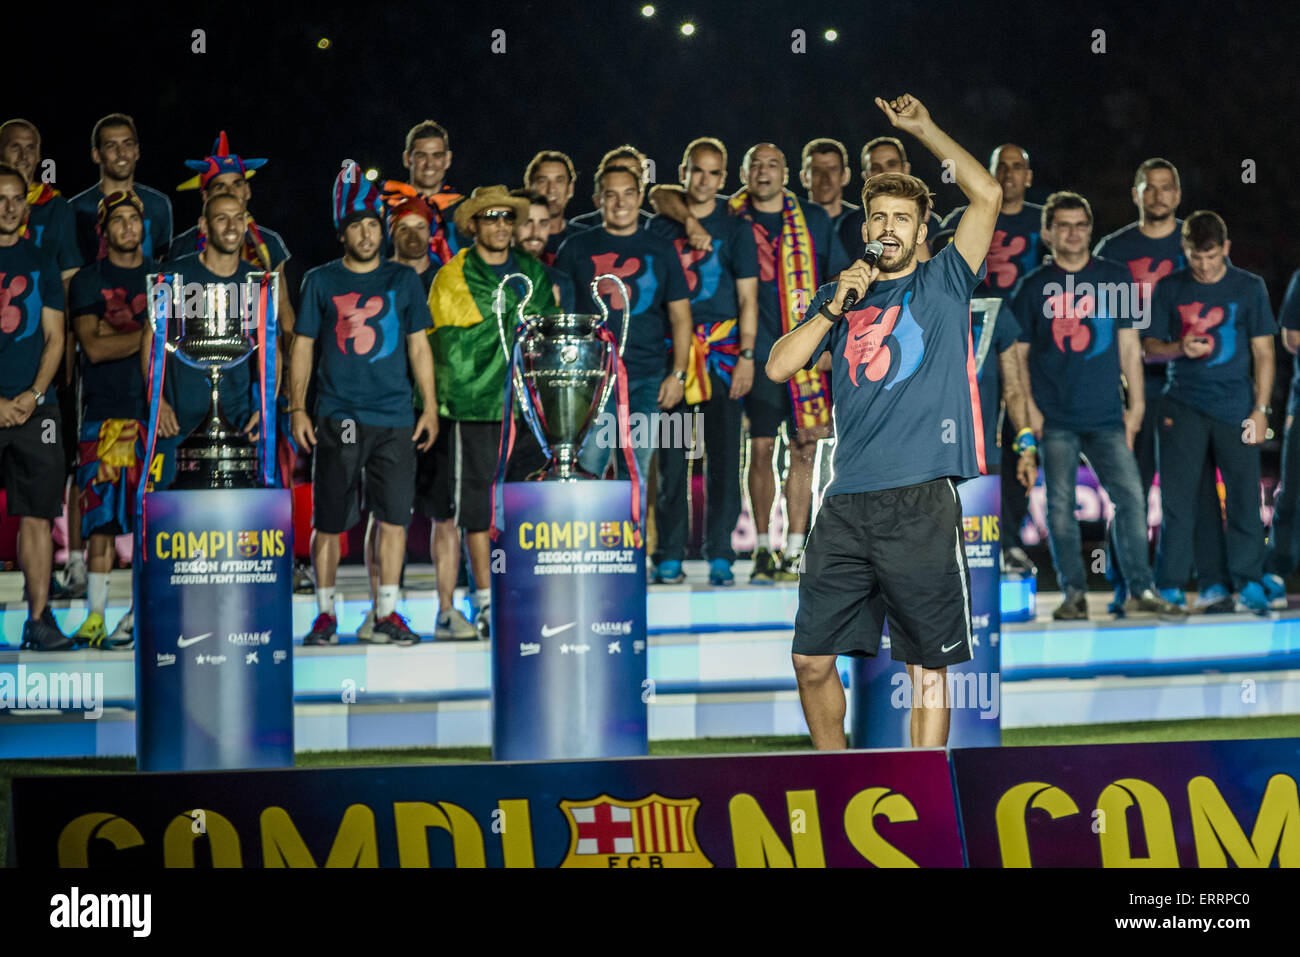 Barcelona, Catalonia, Spain. 7th June, 2015. FC Barcelona's centre-back GERARD PIQUE delivers a short speech in front of his team mates during a victory ceremony to celebrate the 2nd 'Triple' in the club's history in the Camp Nou stadium Credit:  Matthias Oesterle/ZUMA Wire/ZUMAPRESS.com/Alamy Live News Stock Photo